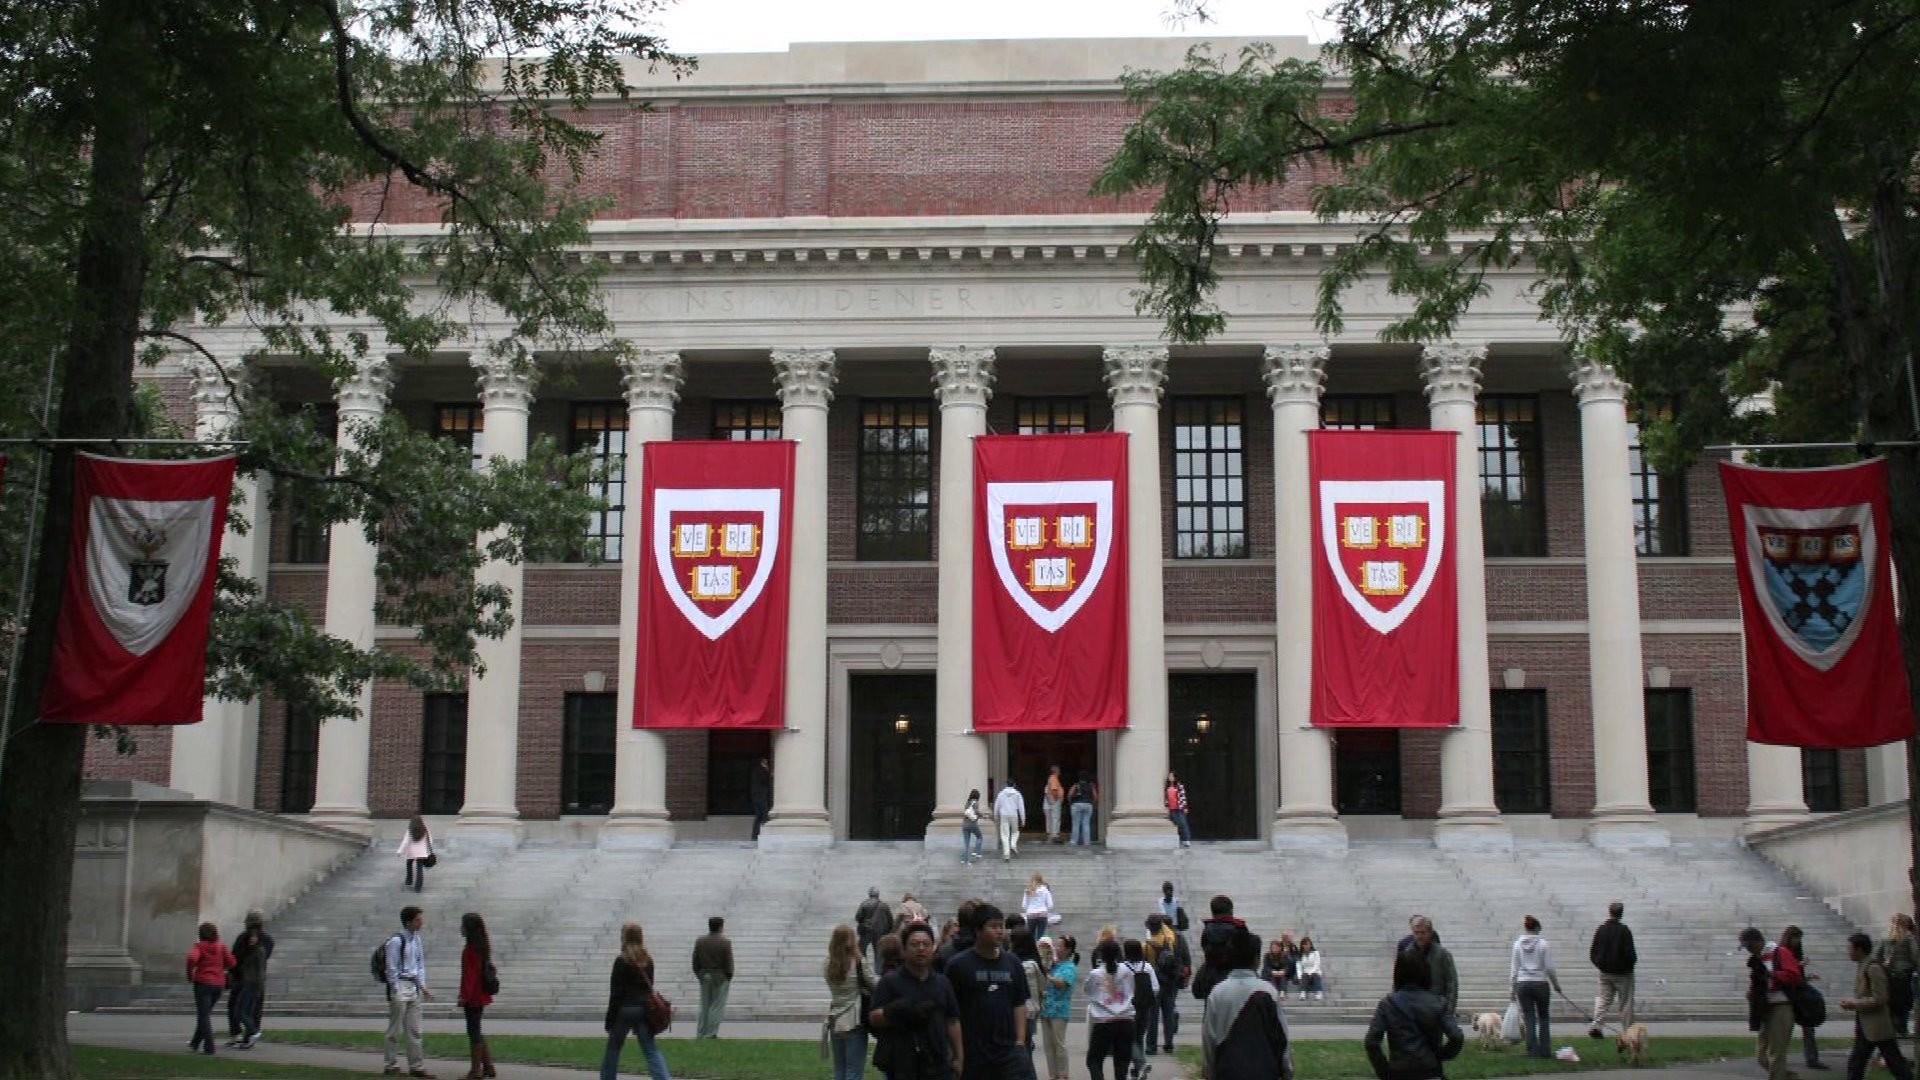 1920x1080 CAMBRIDGE, MA – Things got a little tense at Harvard University on Monday  after someone called in a bomb threat.